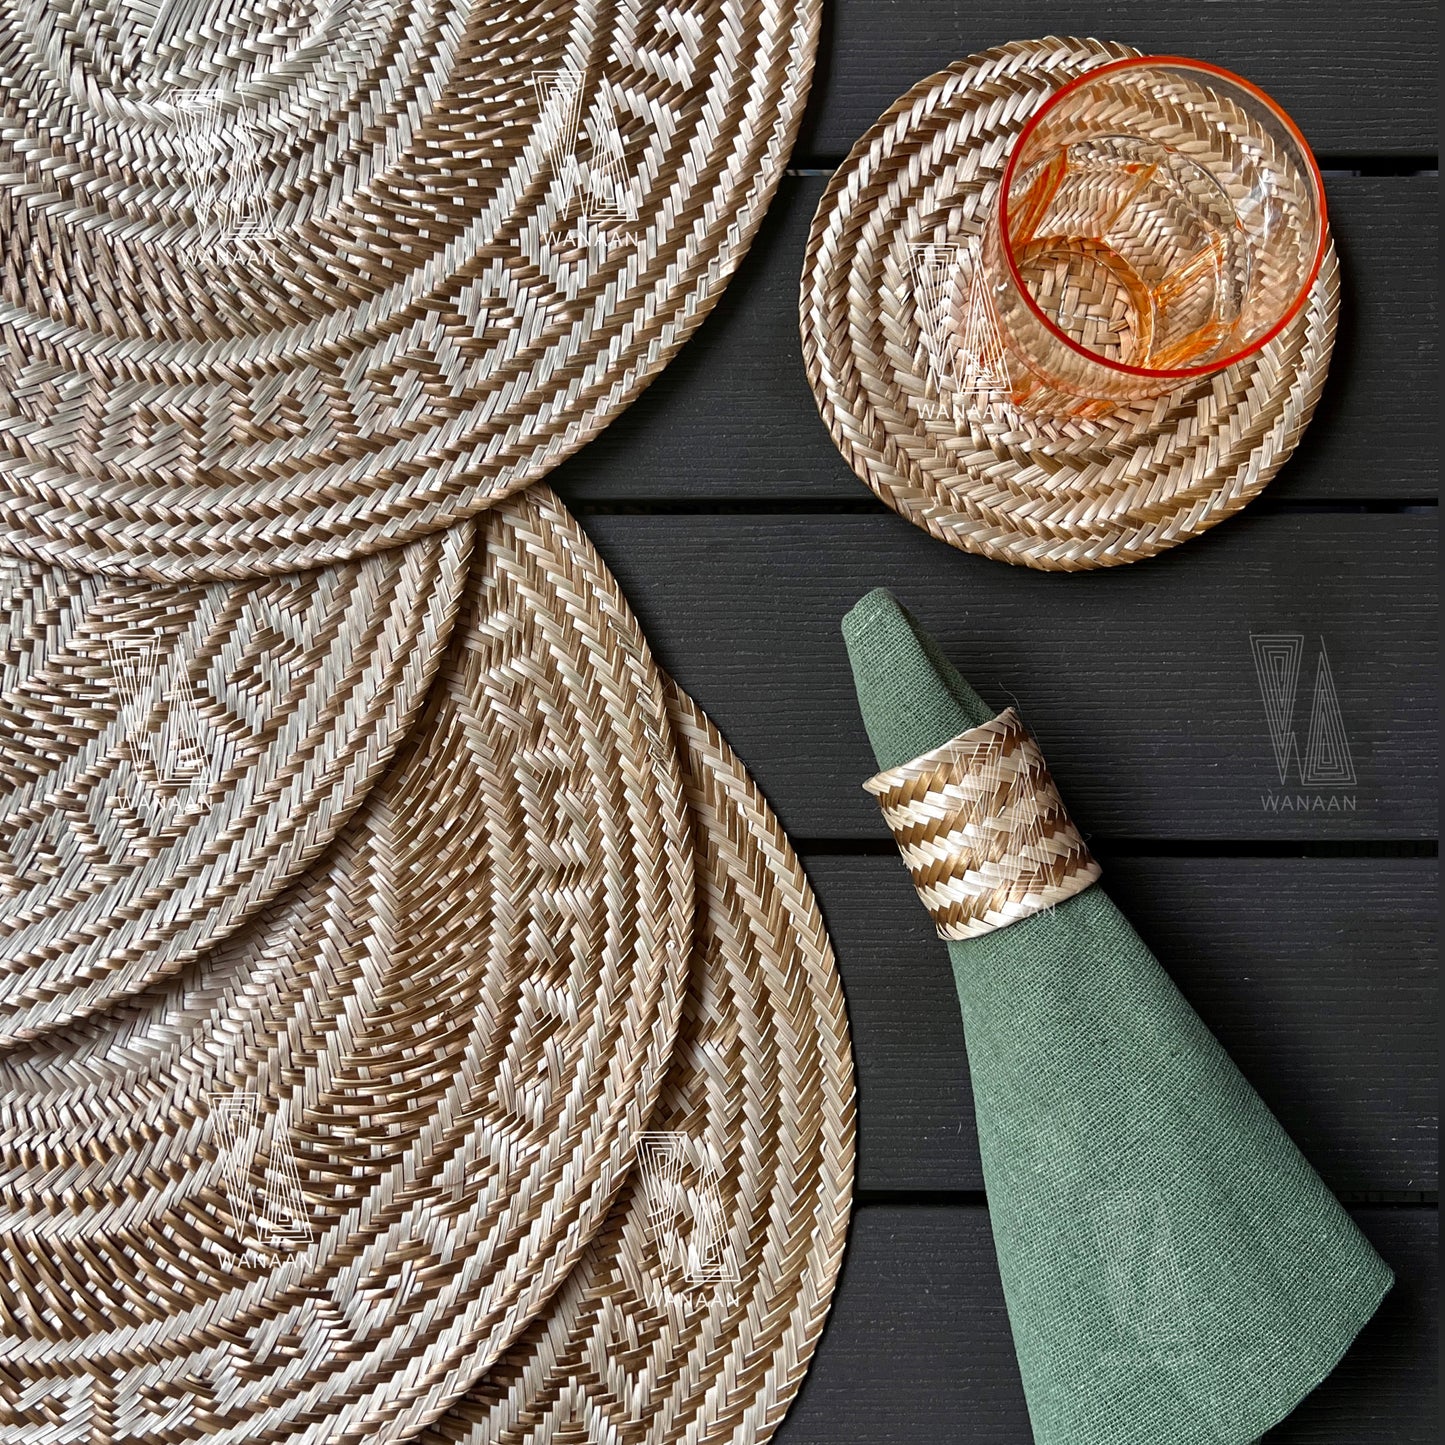 Yang Placemat Style, Handmade Mawisa Palm Placemat, Table Decoration, Boho Table Setting from Colombia - Set of 4 or 6